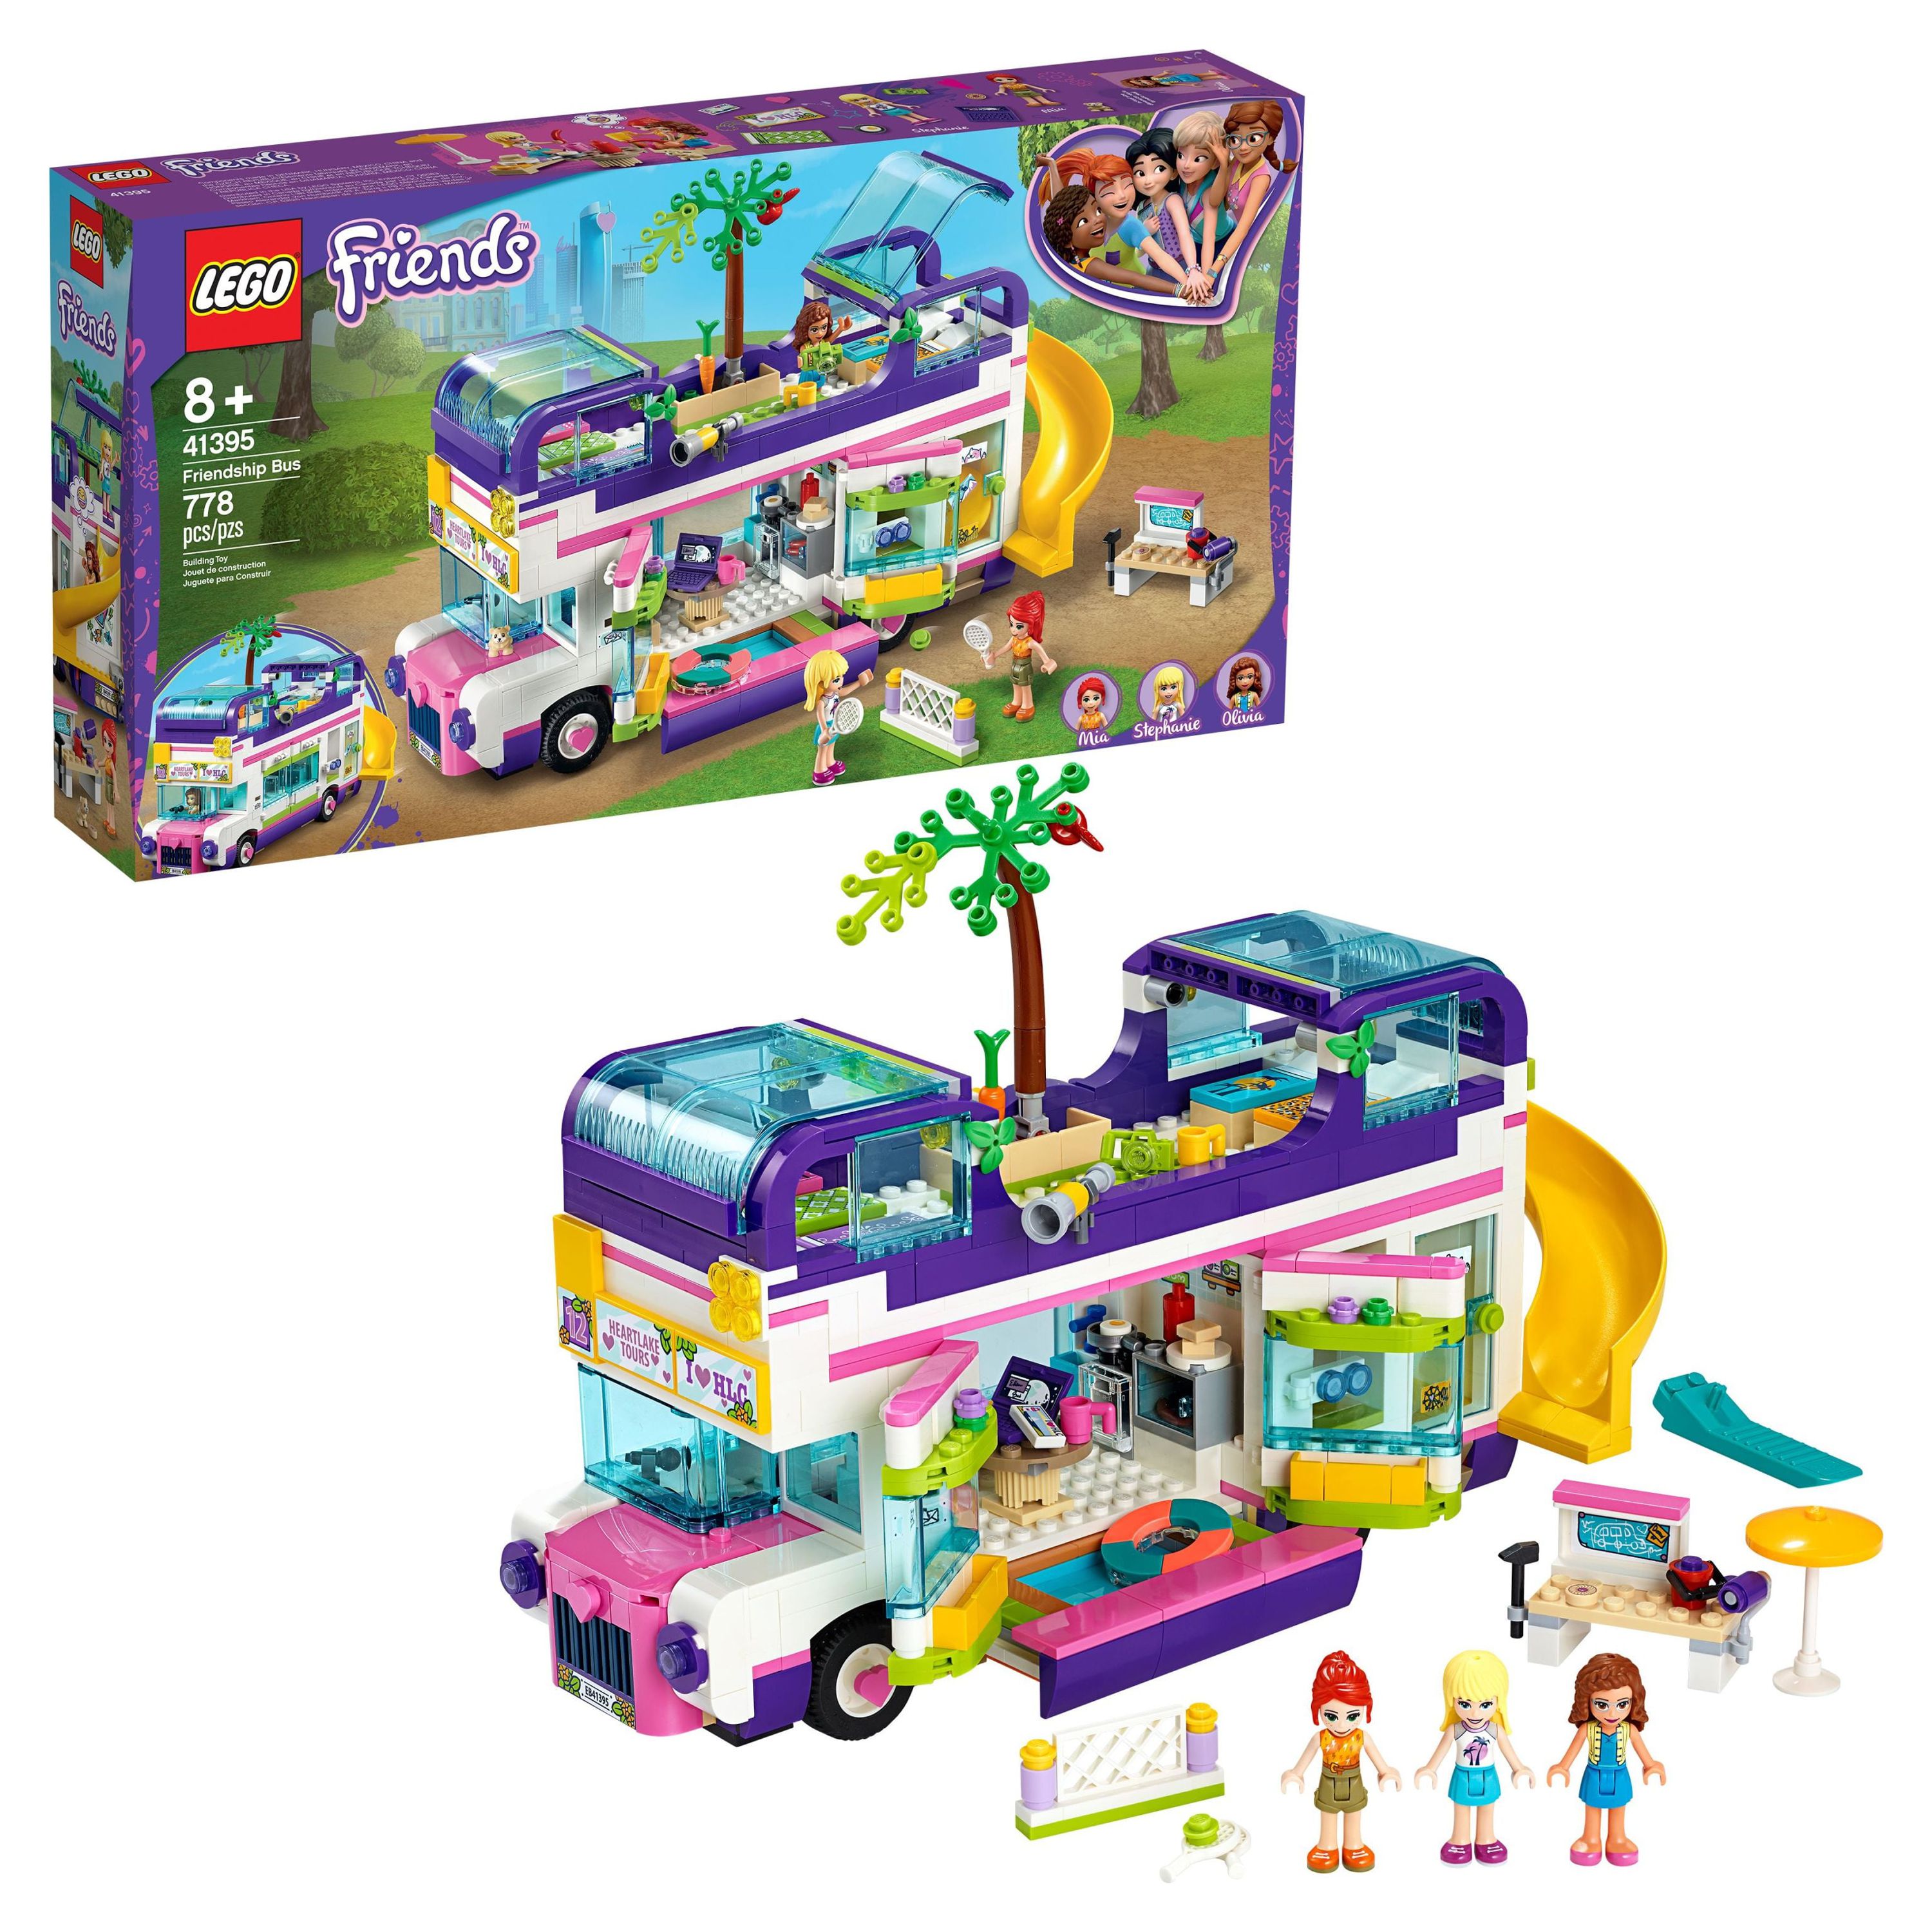 LEGO Friends Friendship Bus 41395 LEGO Heartlake City Toy Playset (778 Pieces) - image 1 of 7